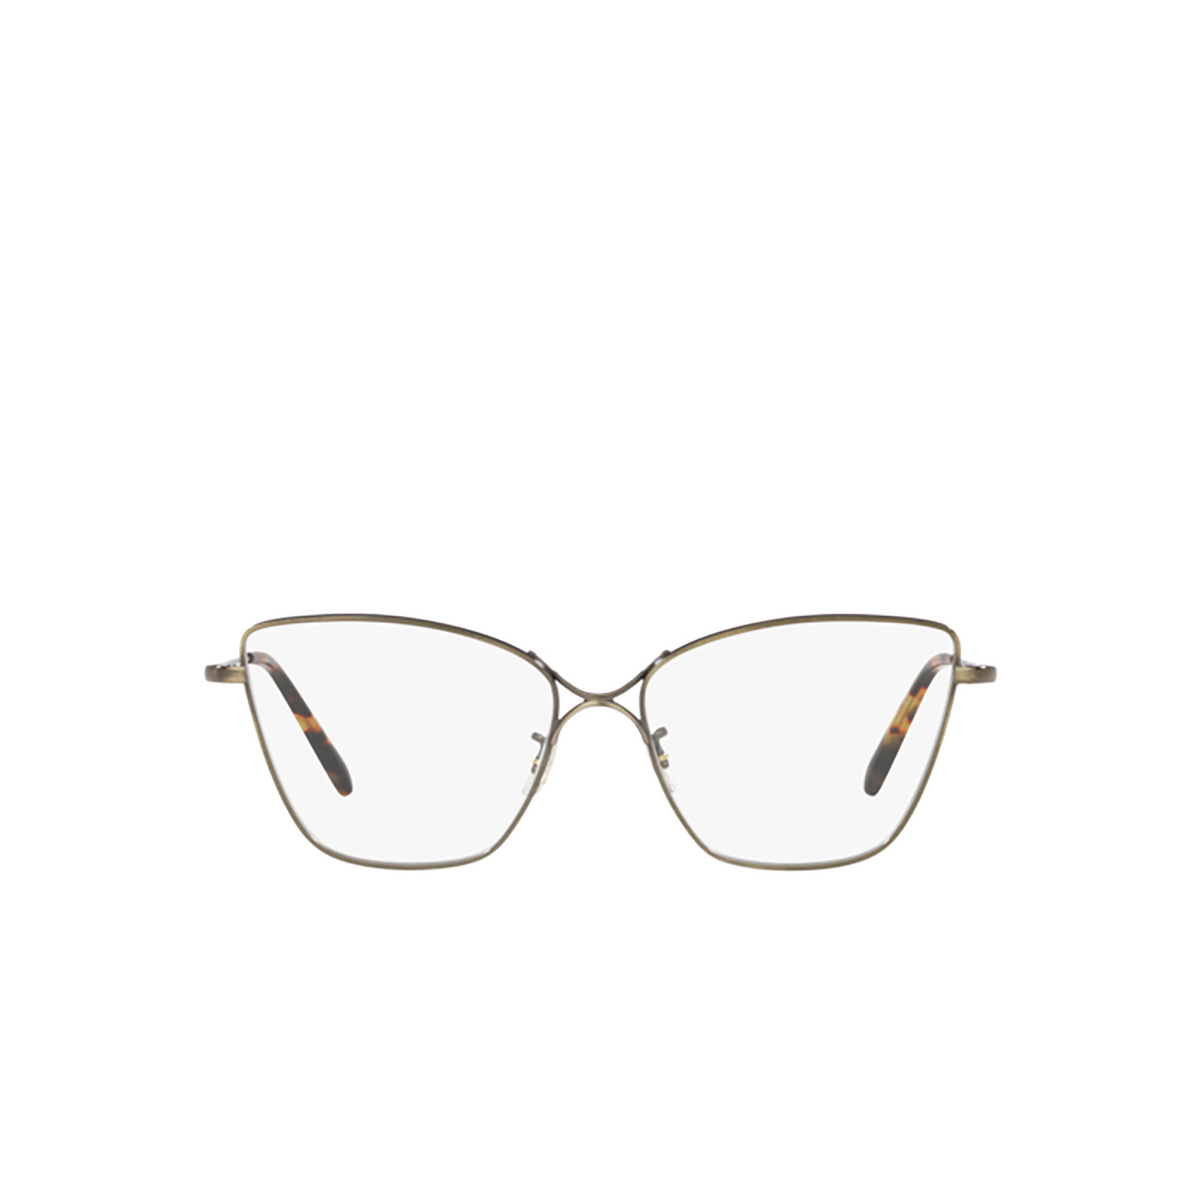 Oliver Peoples MARLYSE Sunglasses 5284SB Antique gold - front view